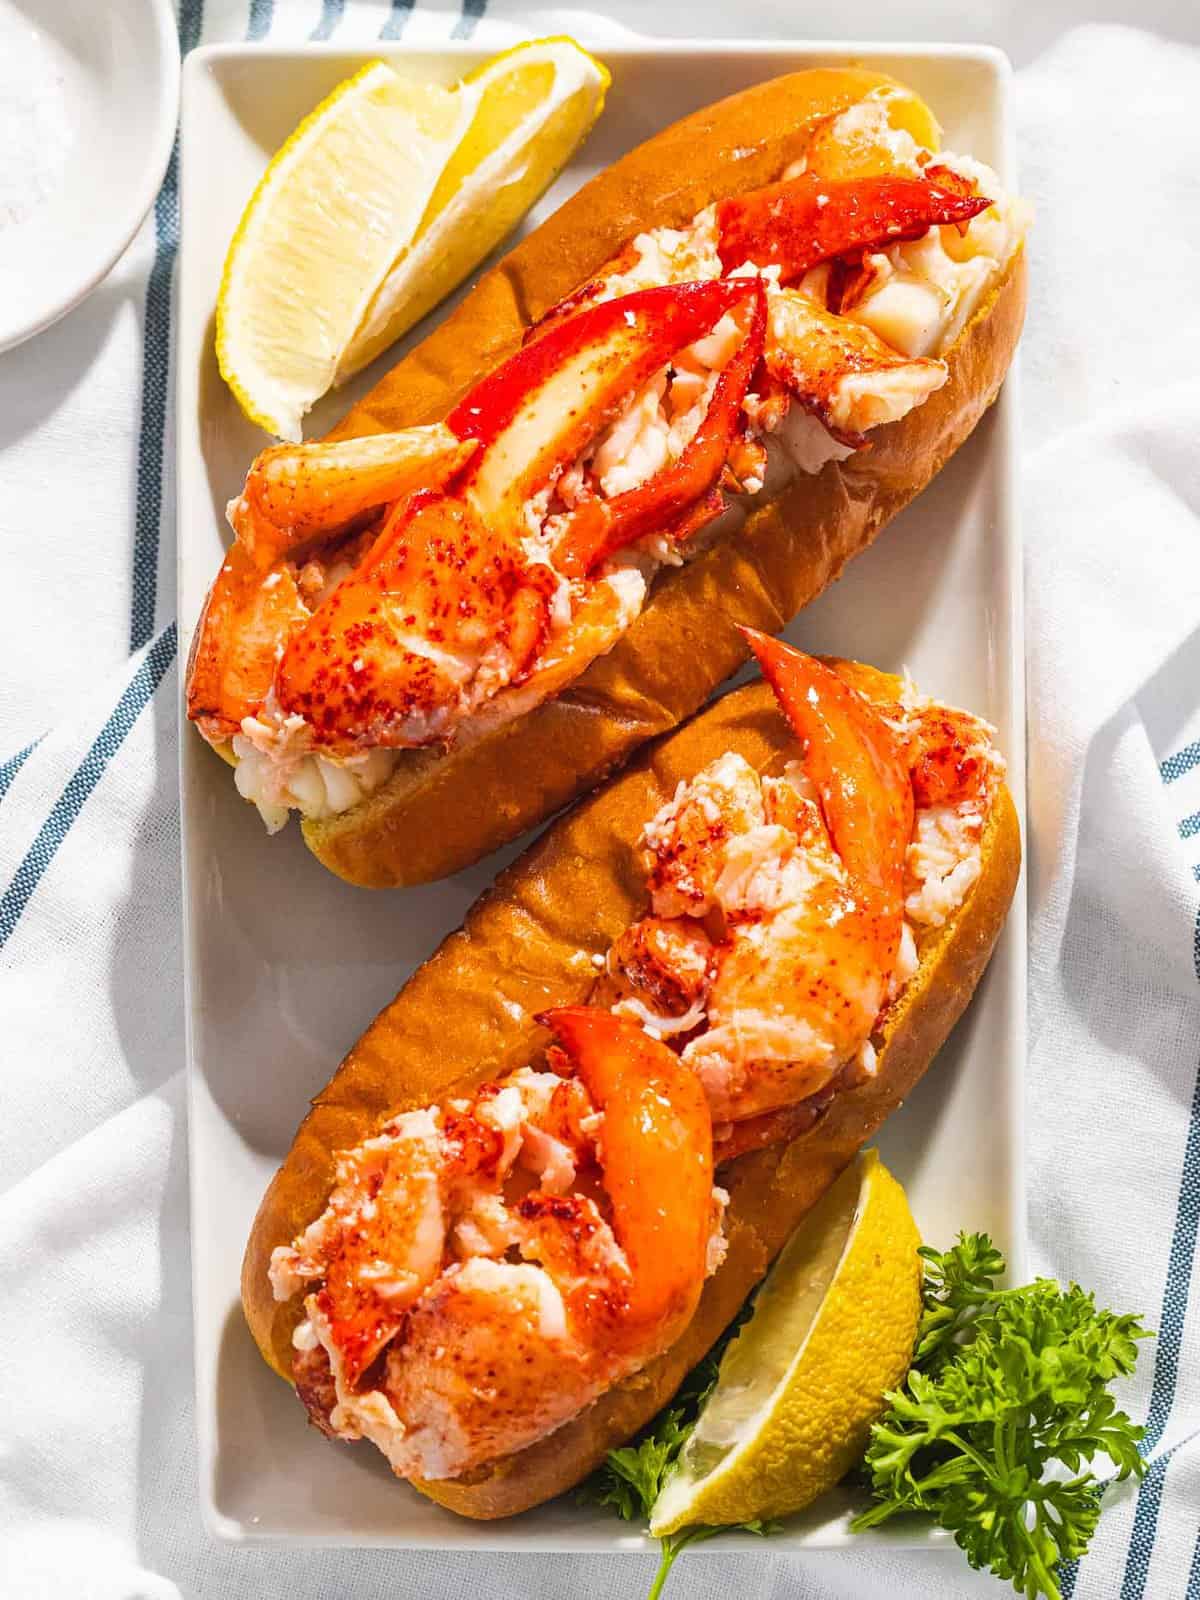 Two lobster rolls on a plate with lemons.